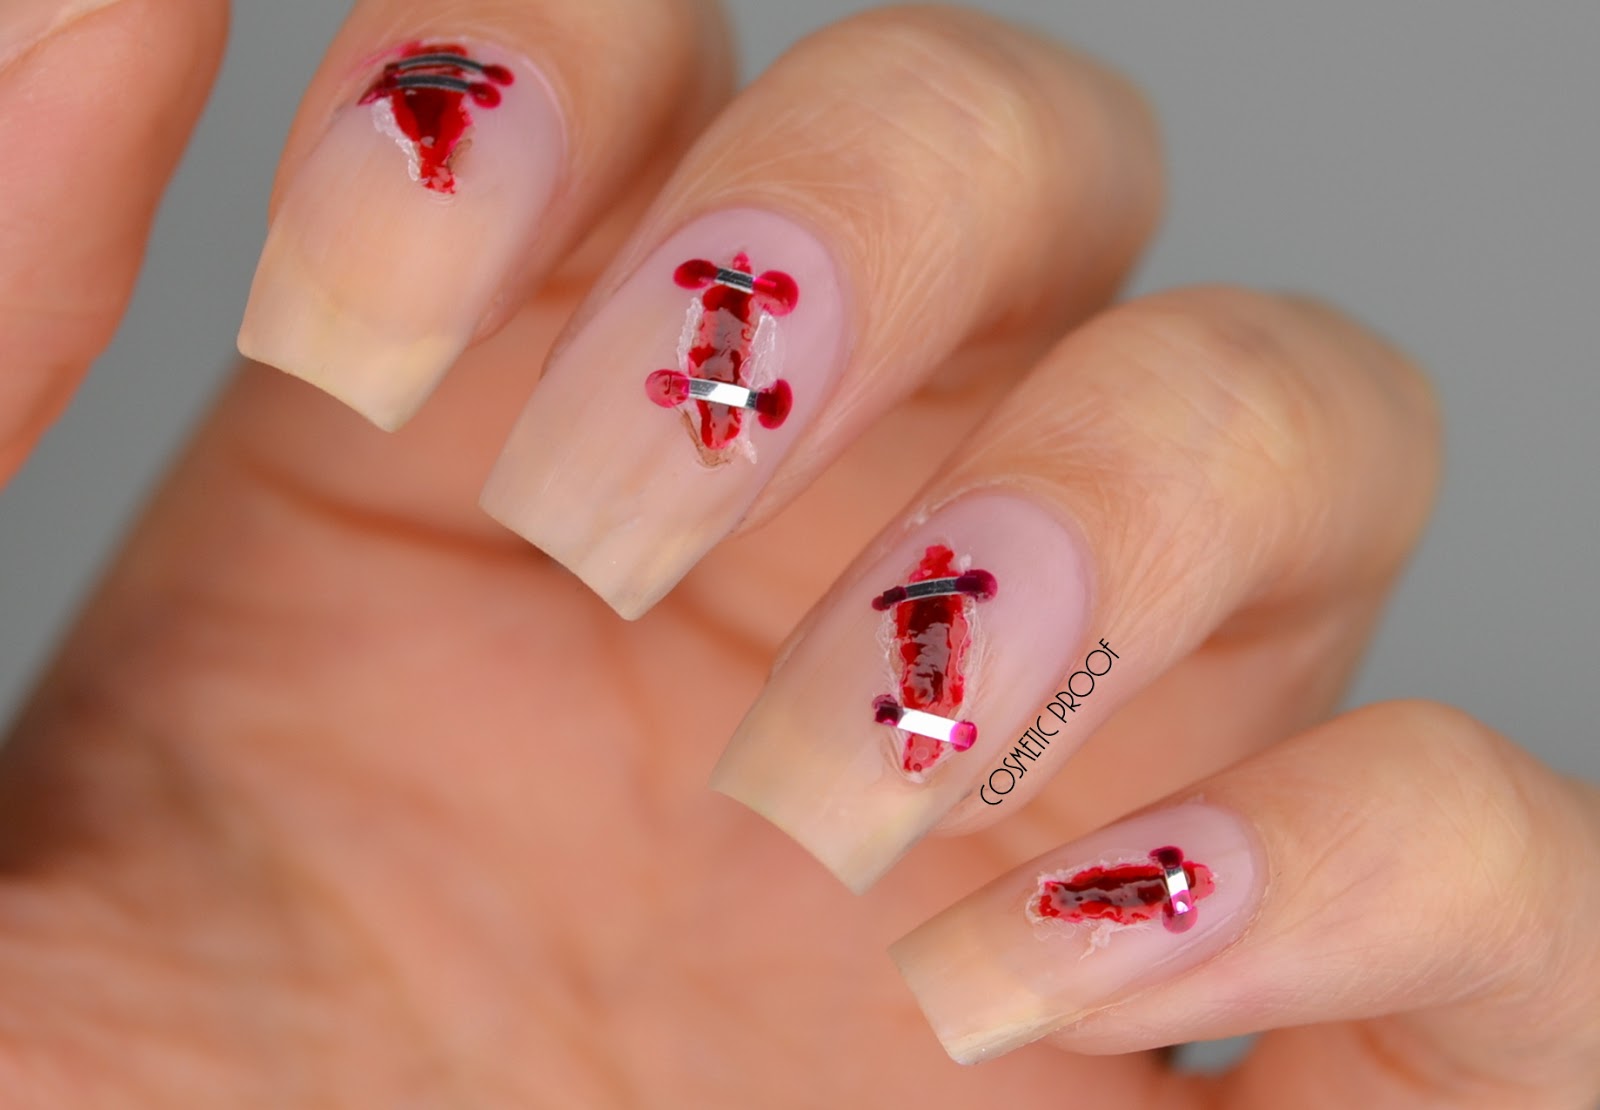 7. Bloody Vampire Nails - wide 4